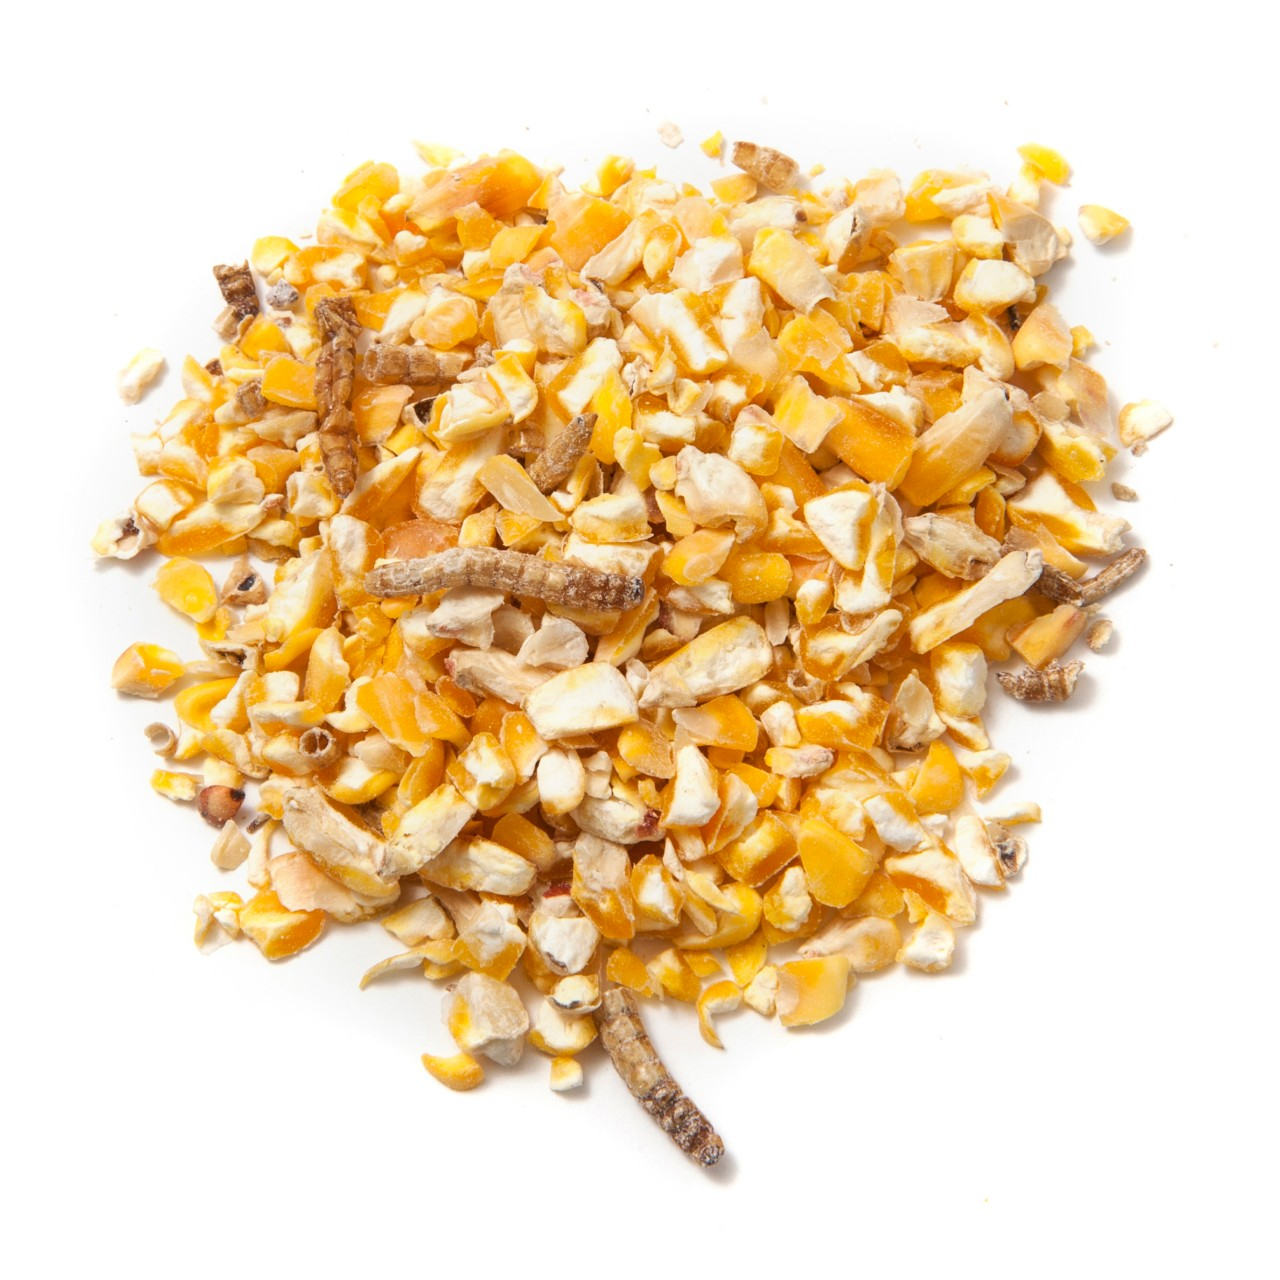 Image of a pile of corn and mealworms bird food.